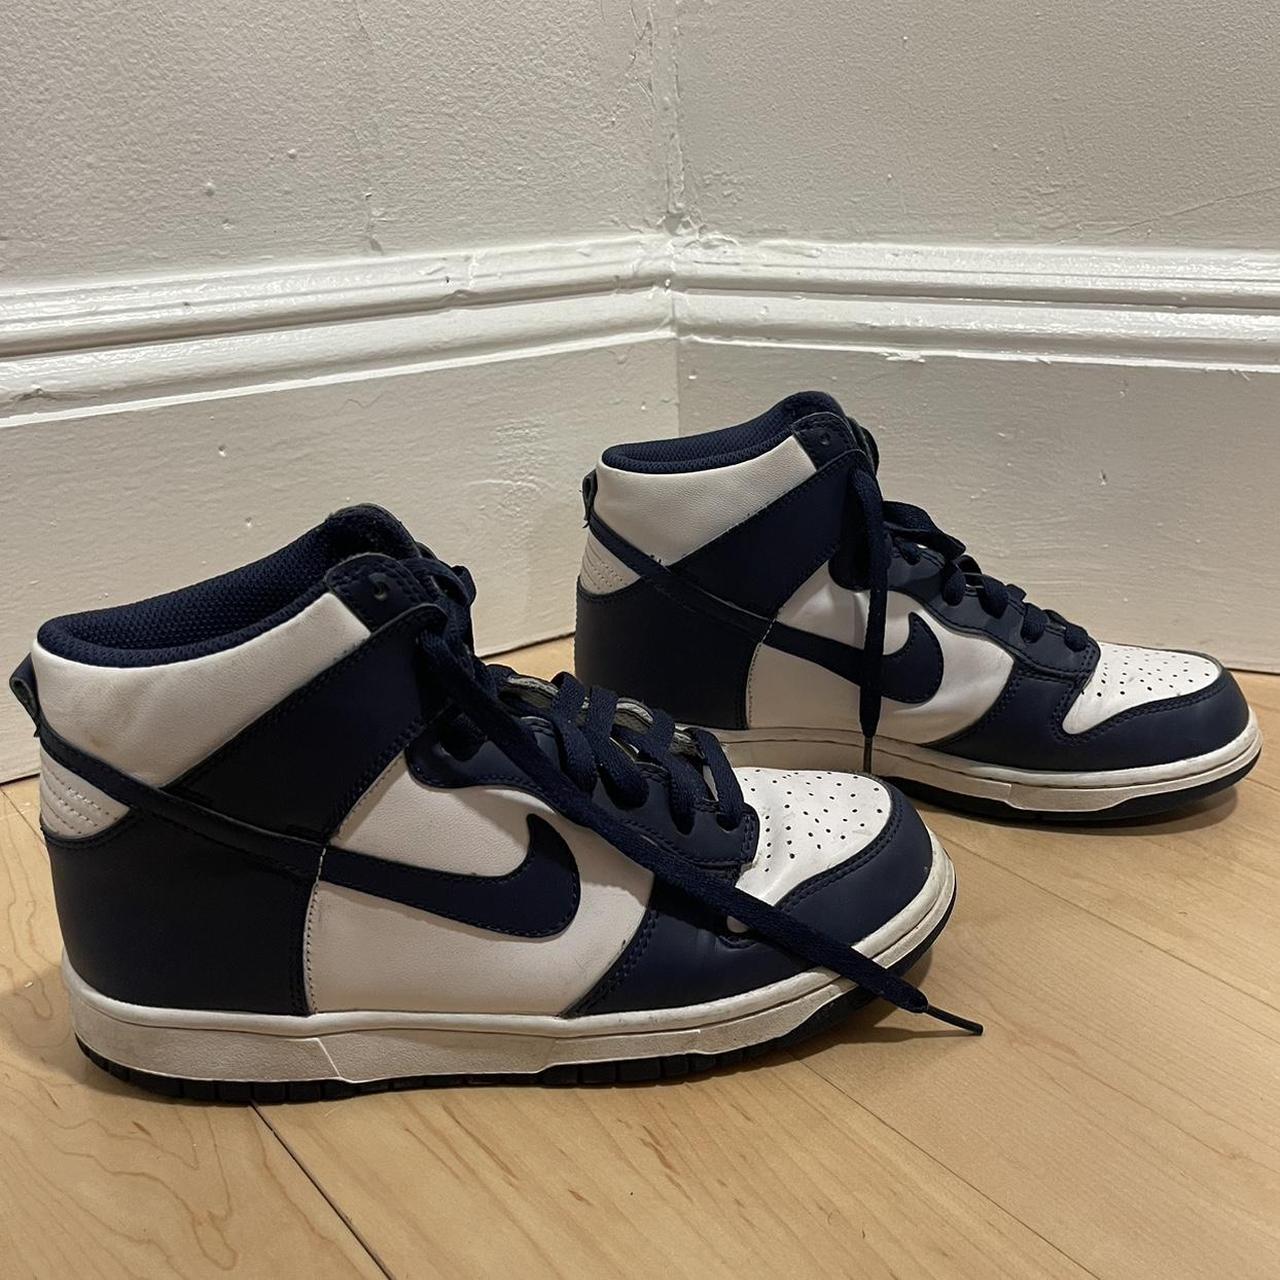 Navy and white Nike dunks high tops - Depop